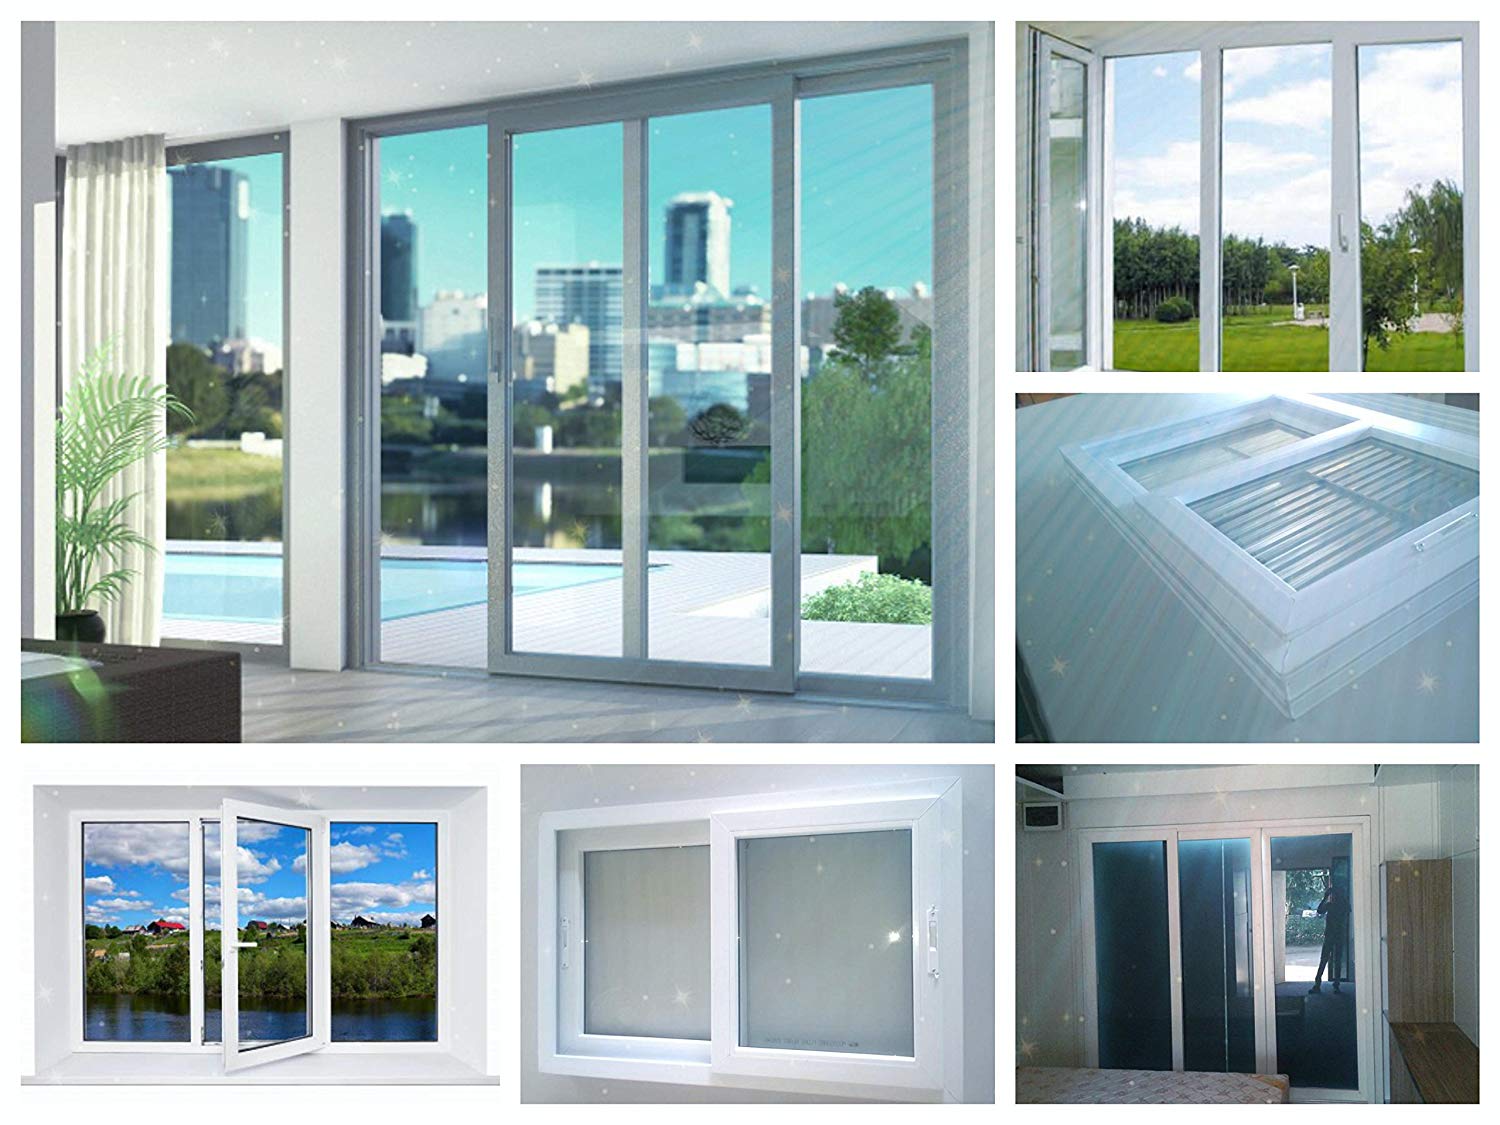  Frosted glass offers privacy while still allowing natural light to filter through